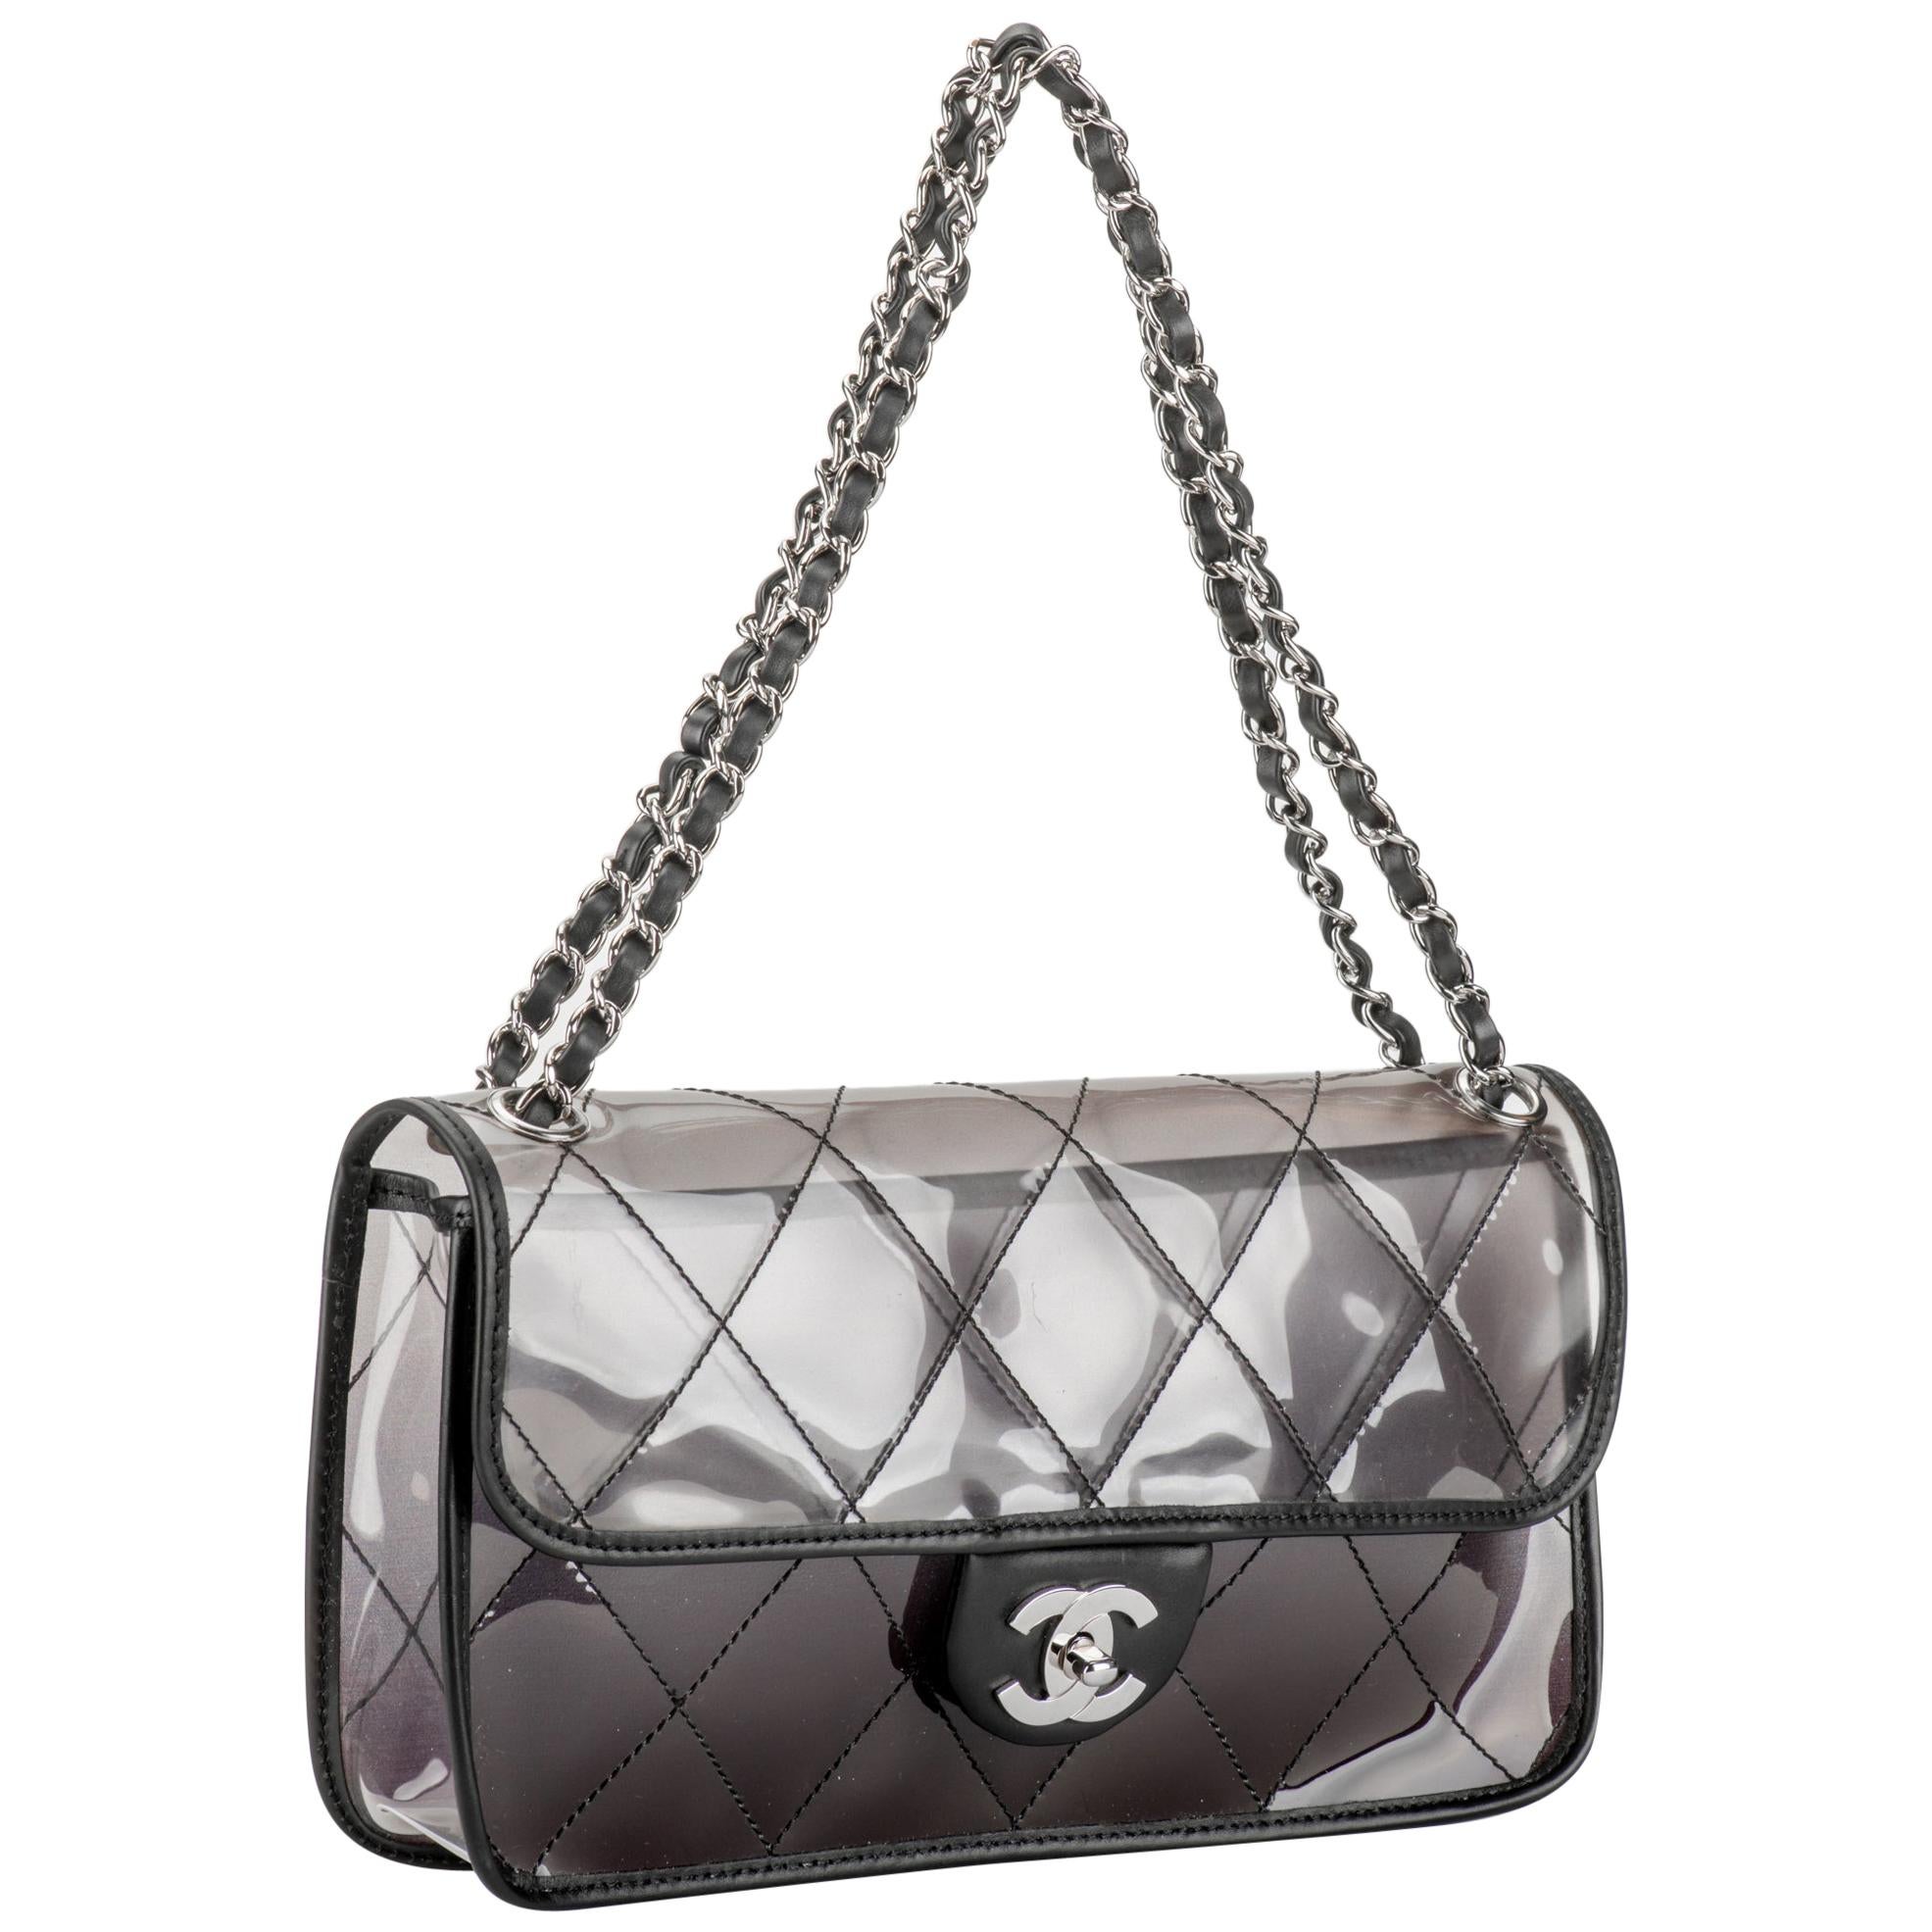 periwinkle chanel bag